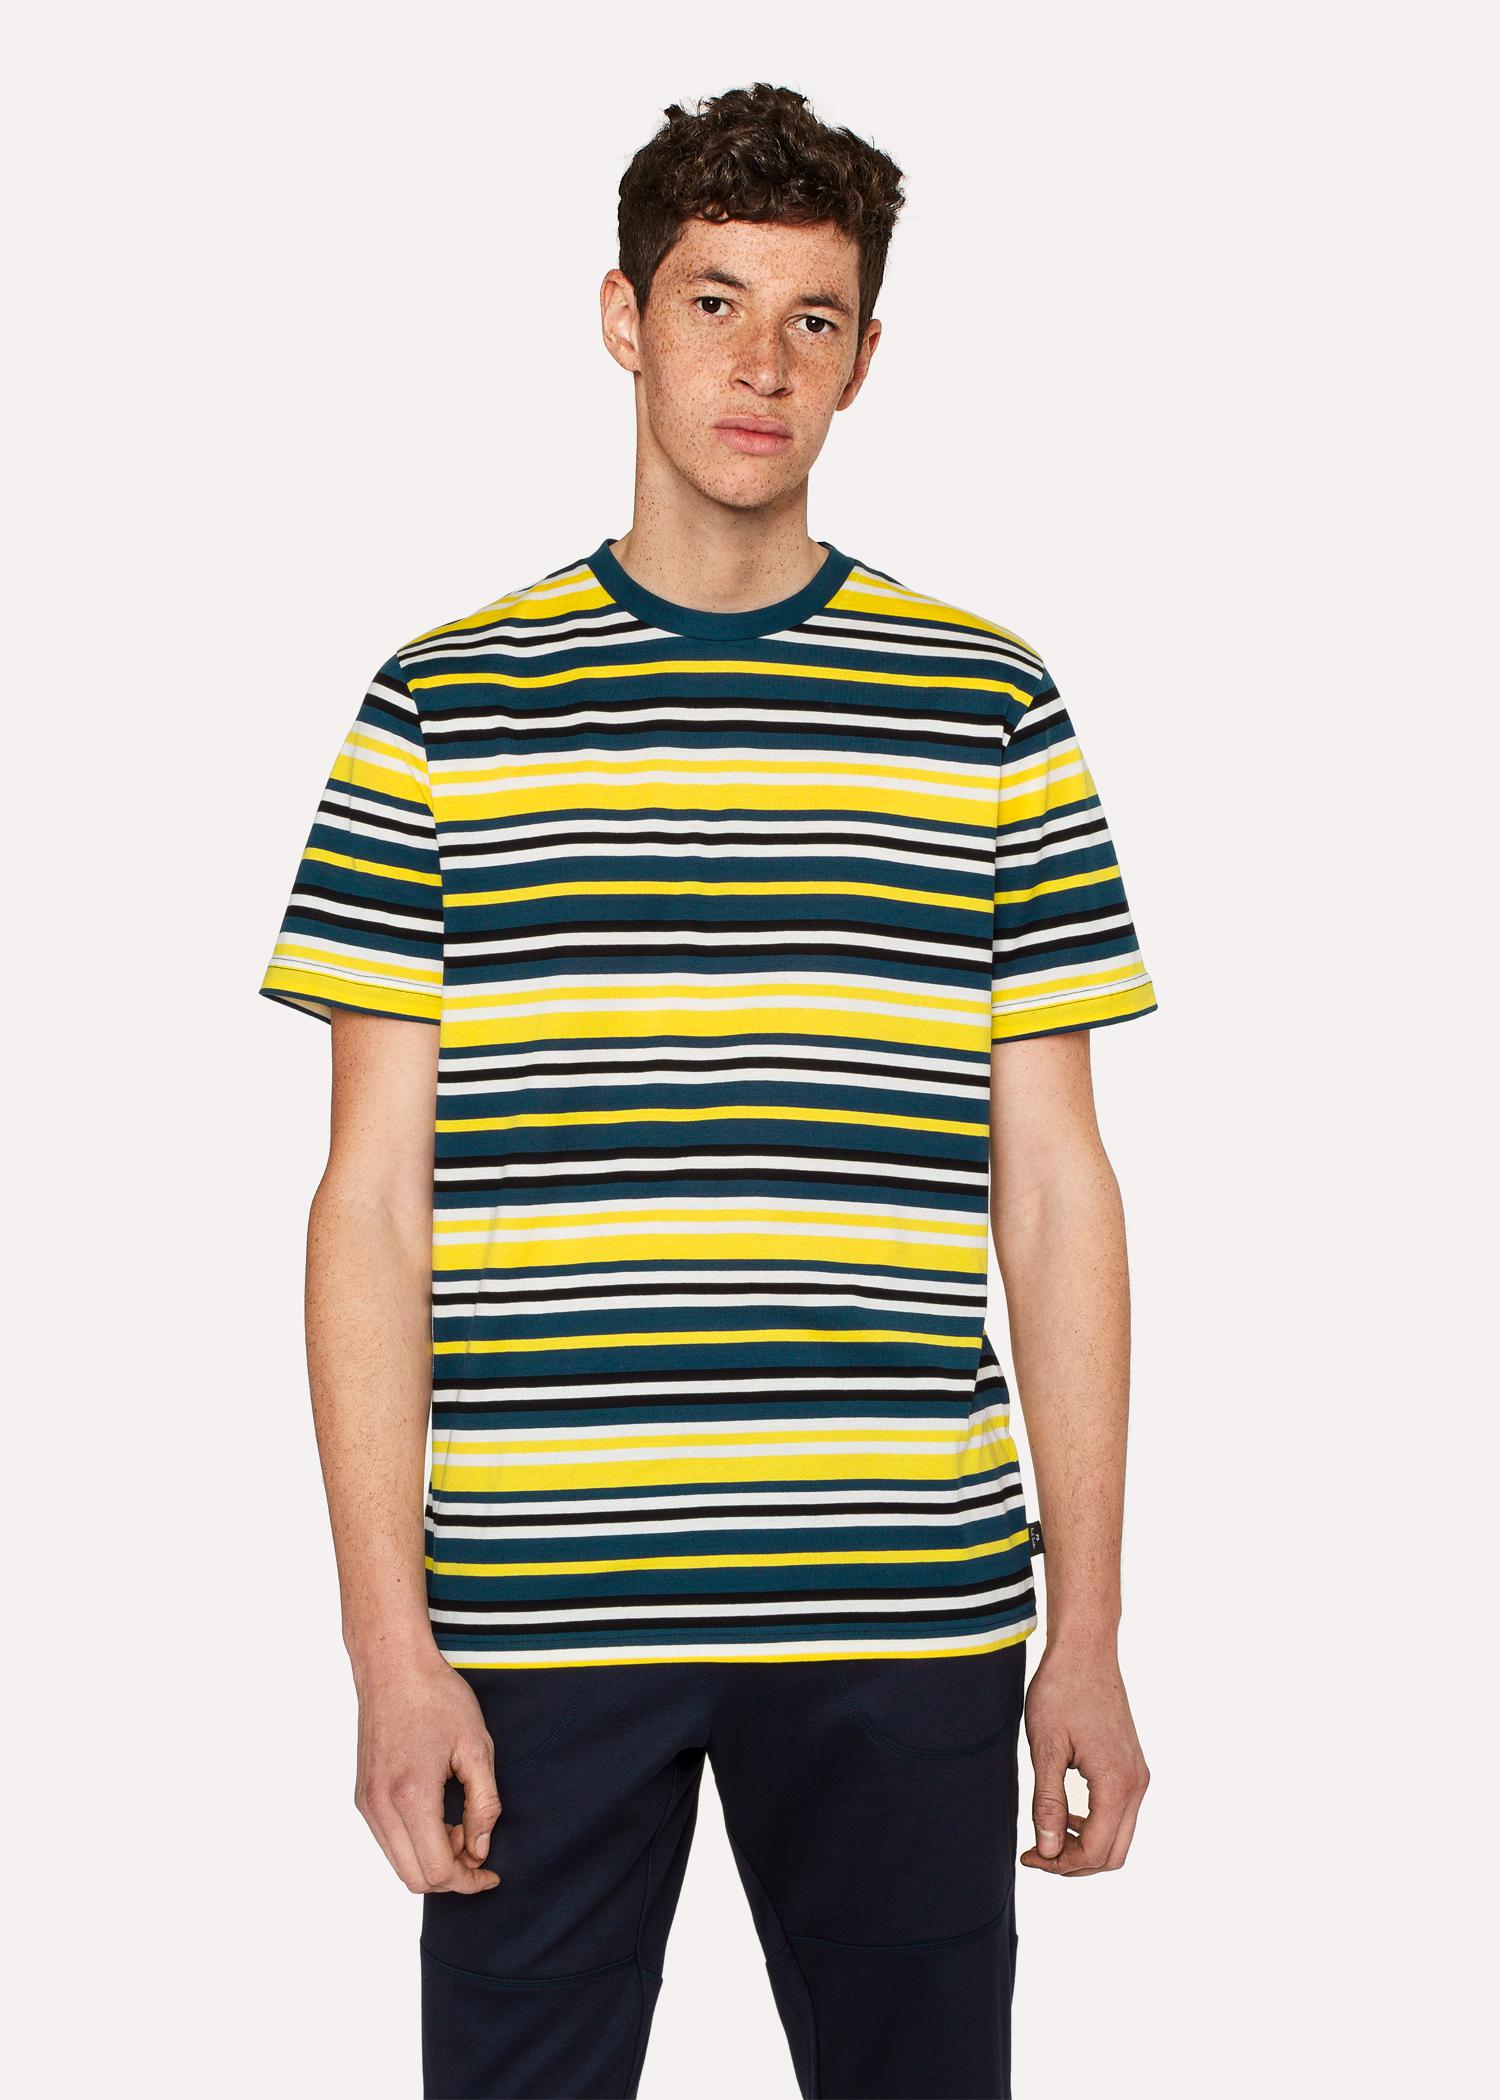 Lyst - Paul Smith Men's Yellow And Slate Blue Stripe T-shirt in Yellow ...